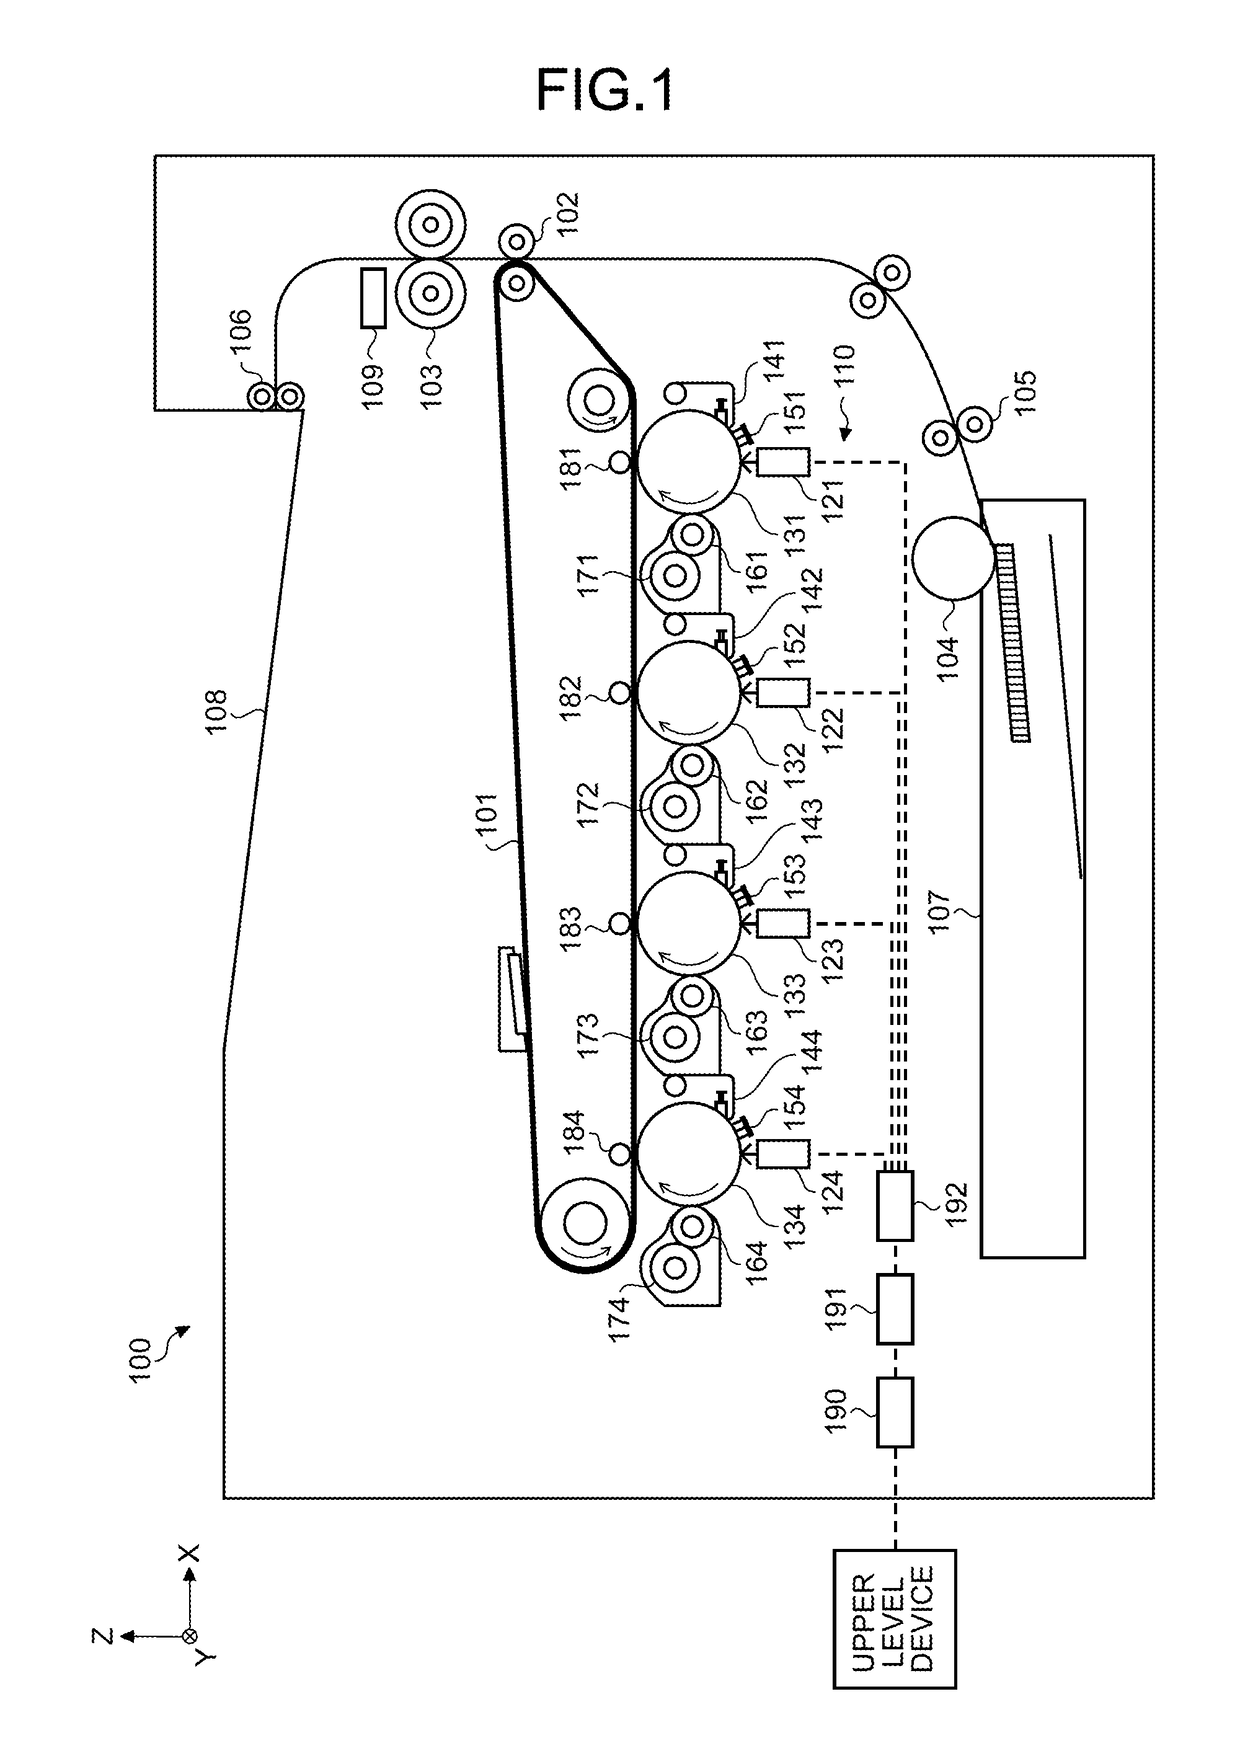 Control system, image forming system, control method, and computer-readable recording medium